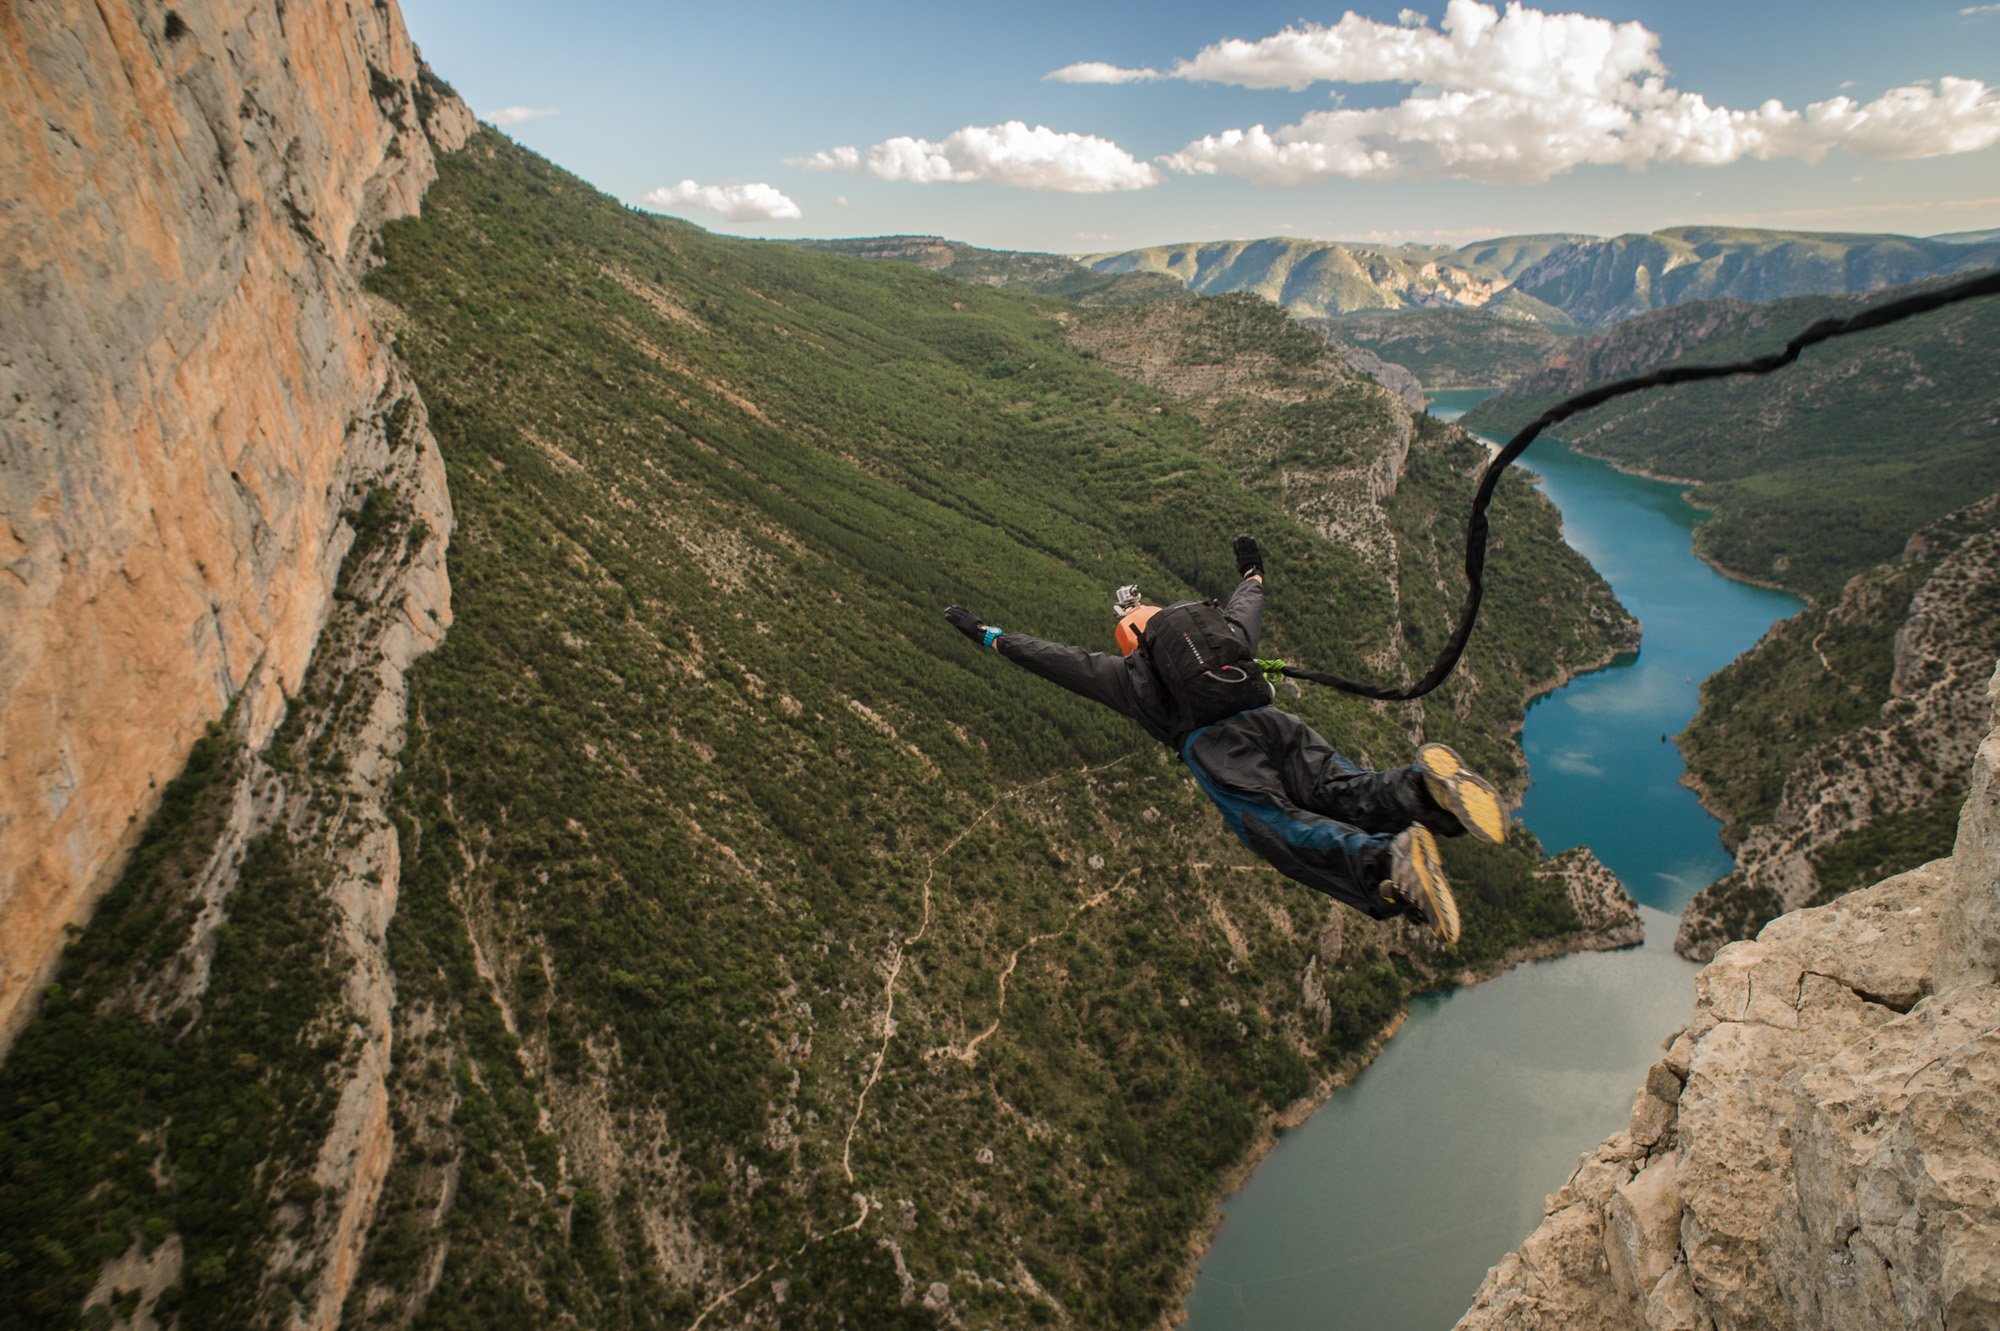 Spain - Extreme sports - World record of rope jump in spain with